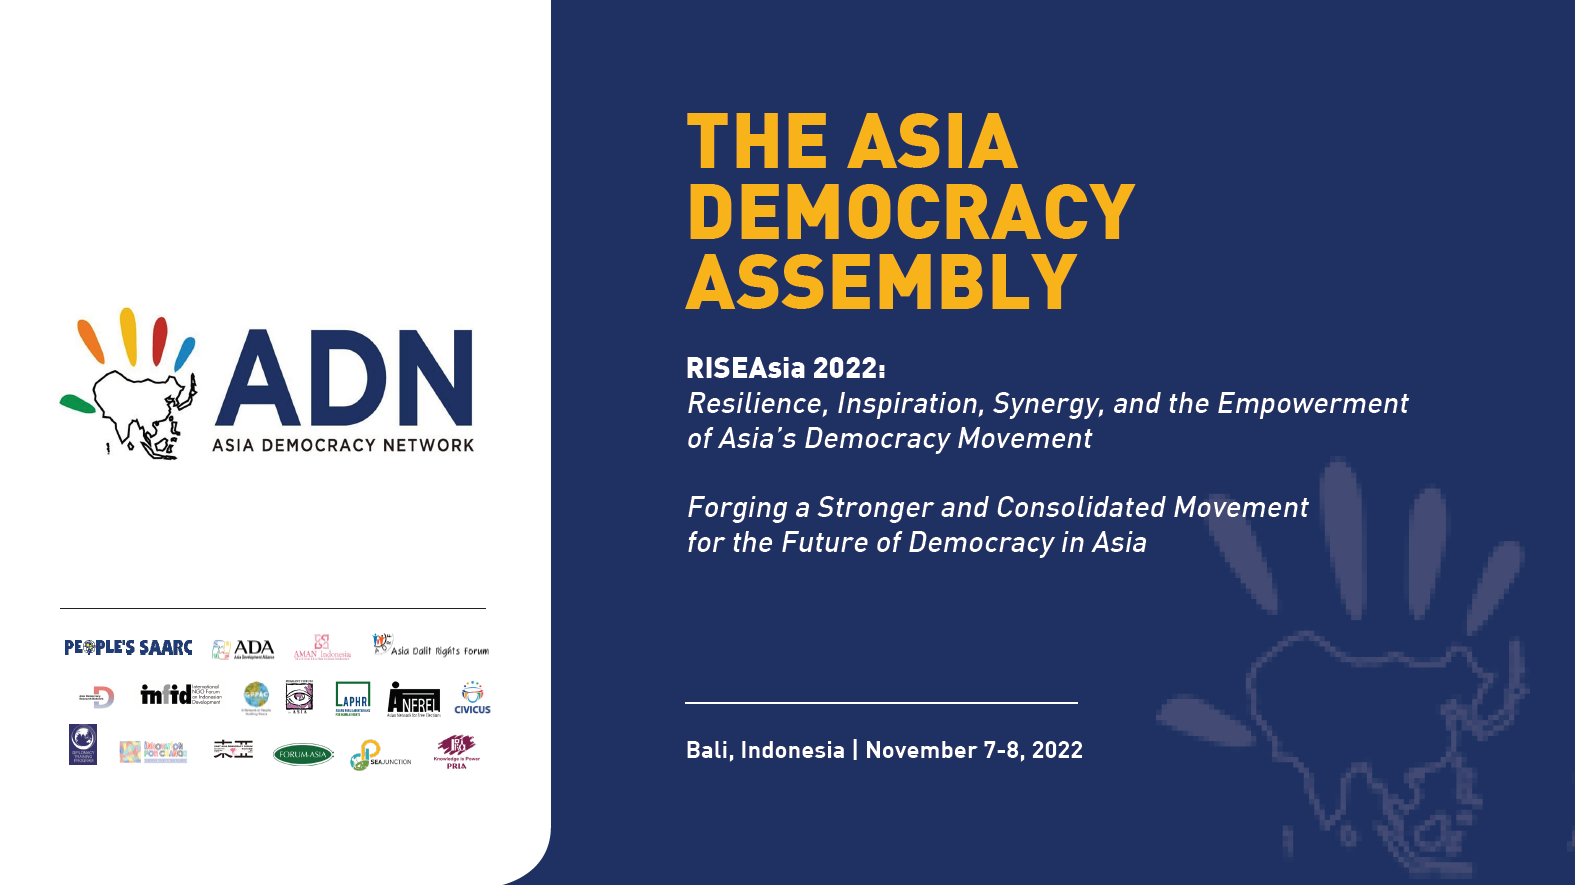 [ADRN-ADN The Asia Democracy Assembly] 